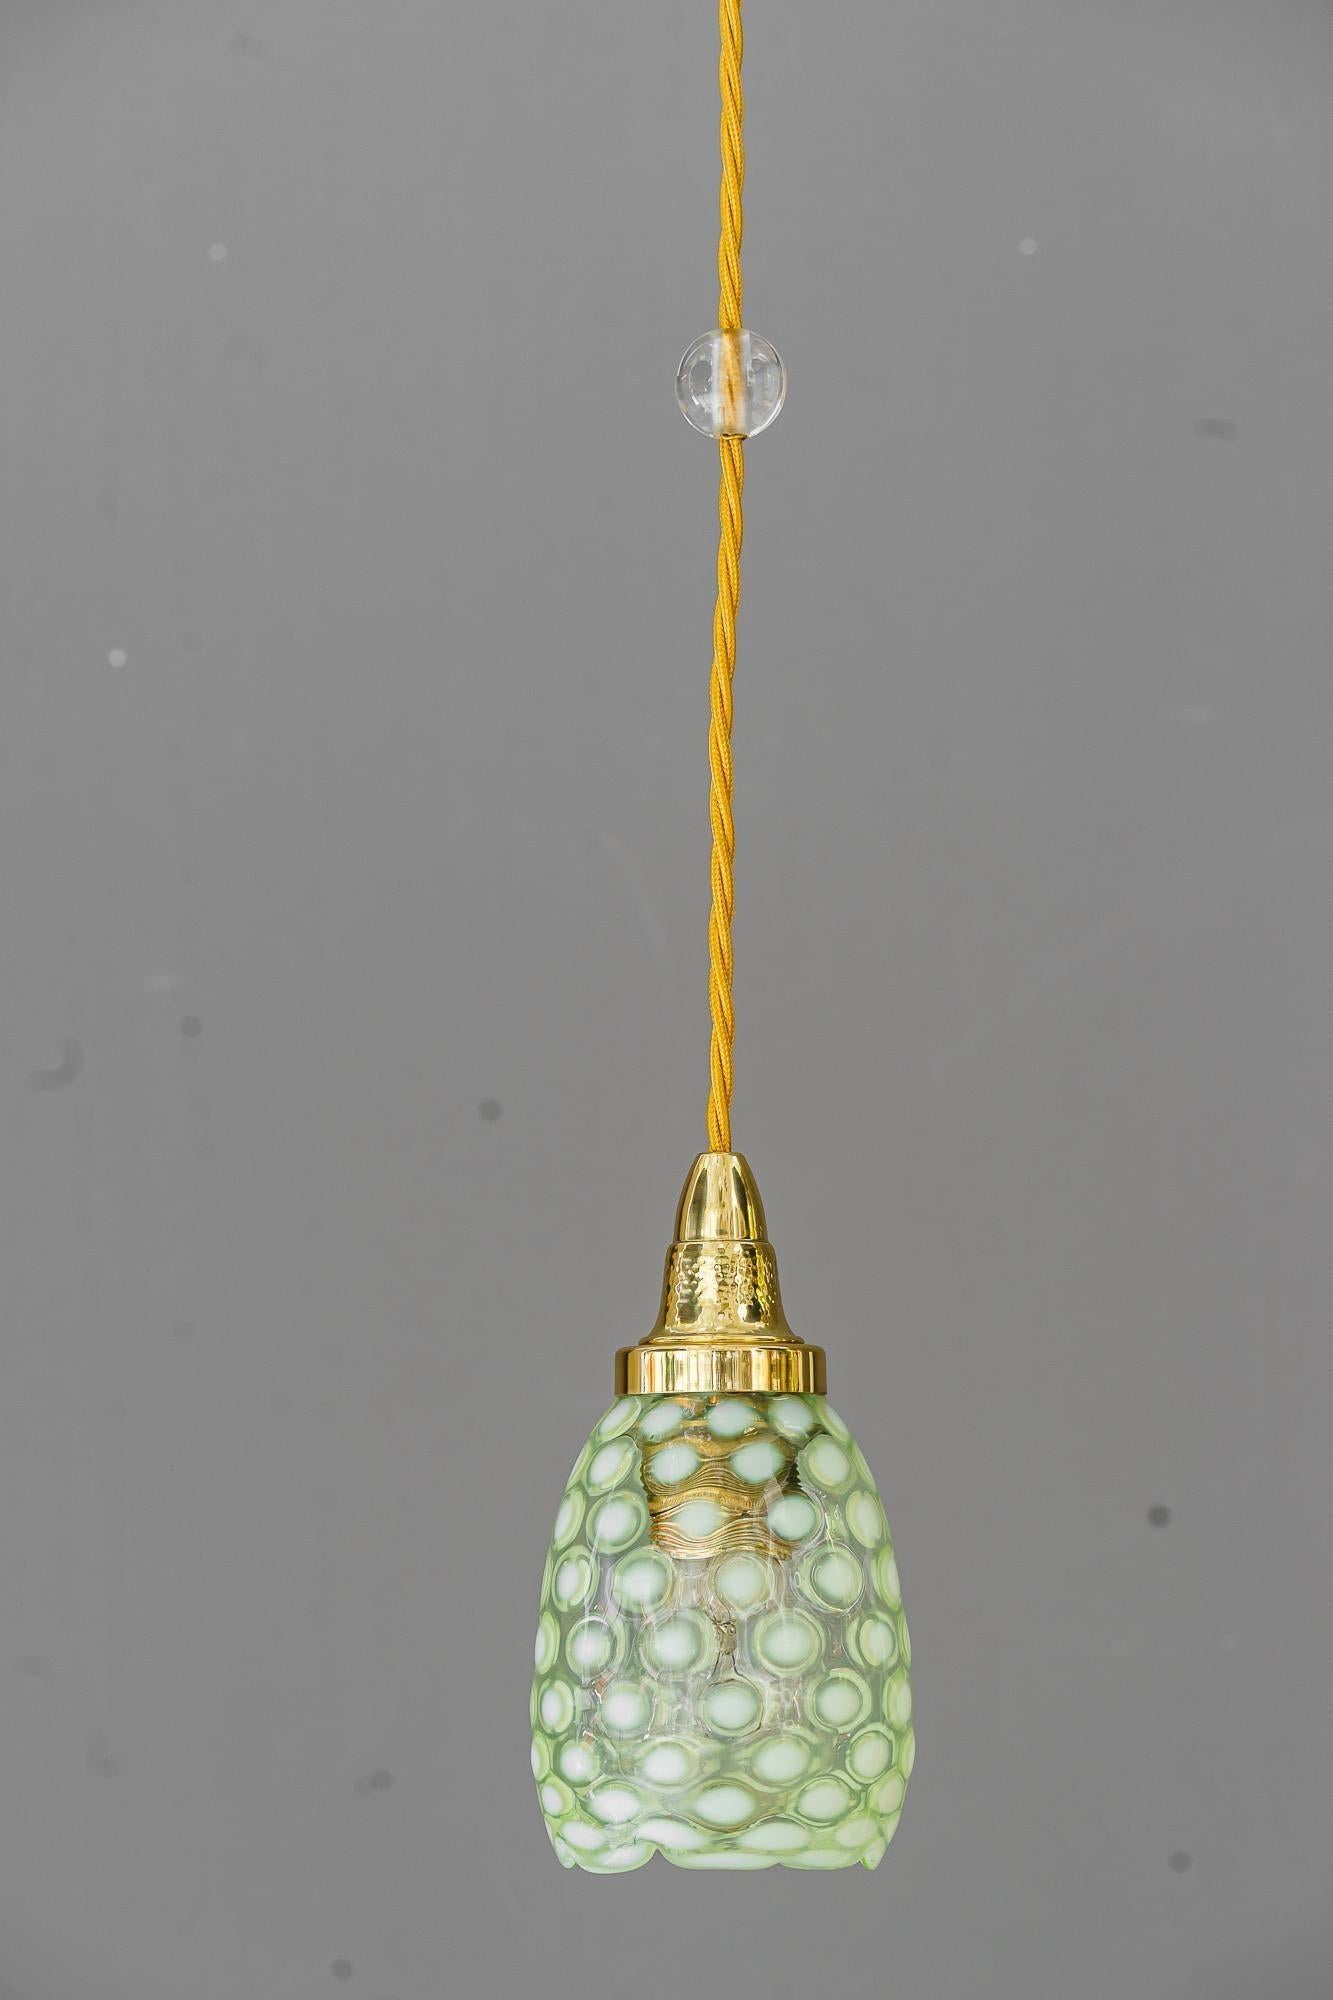 Art deco pendant with original antique opaline glass shade vienna around 1920s
Brass polished and stove enameled
We can adjust the hight of the lamp to fit your room hight
